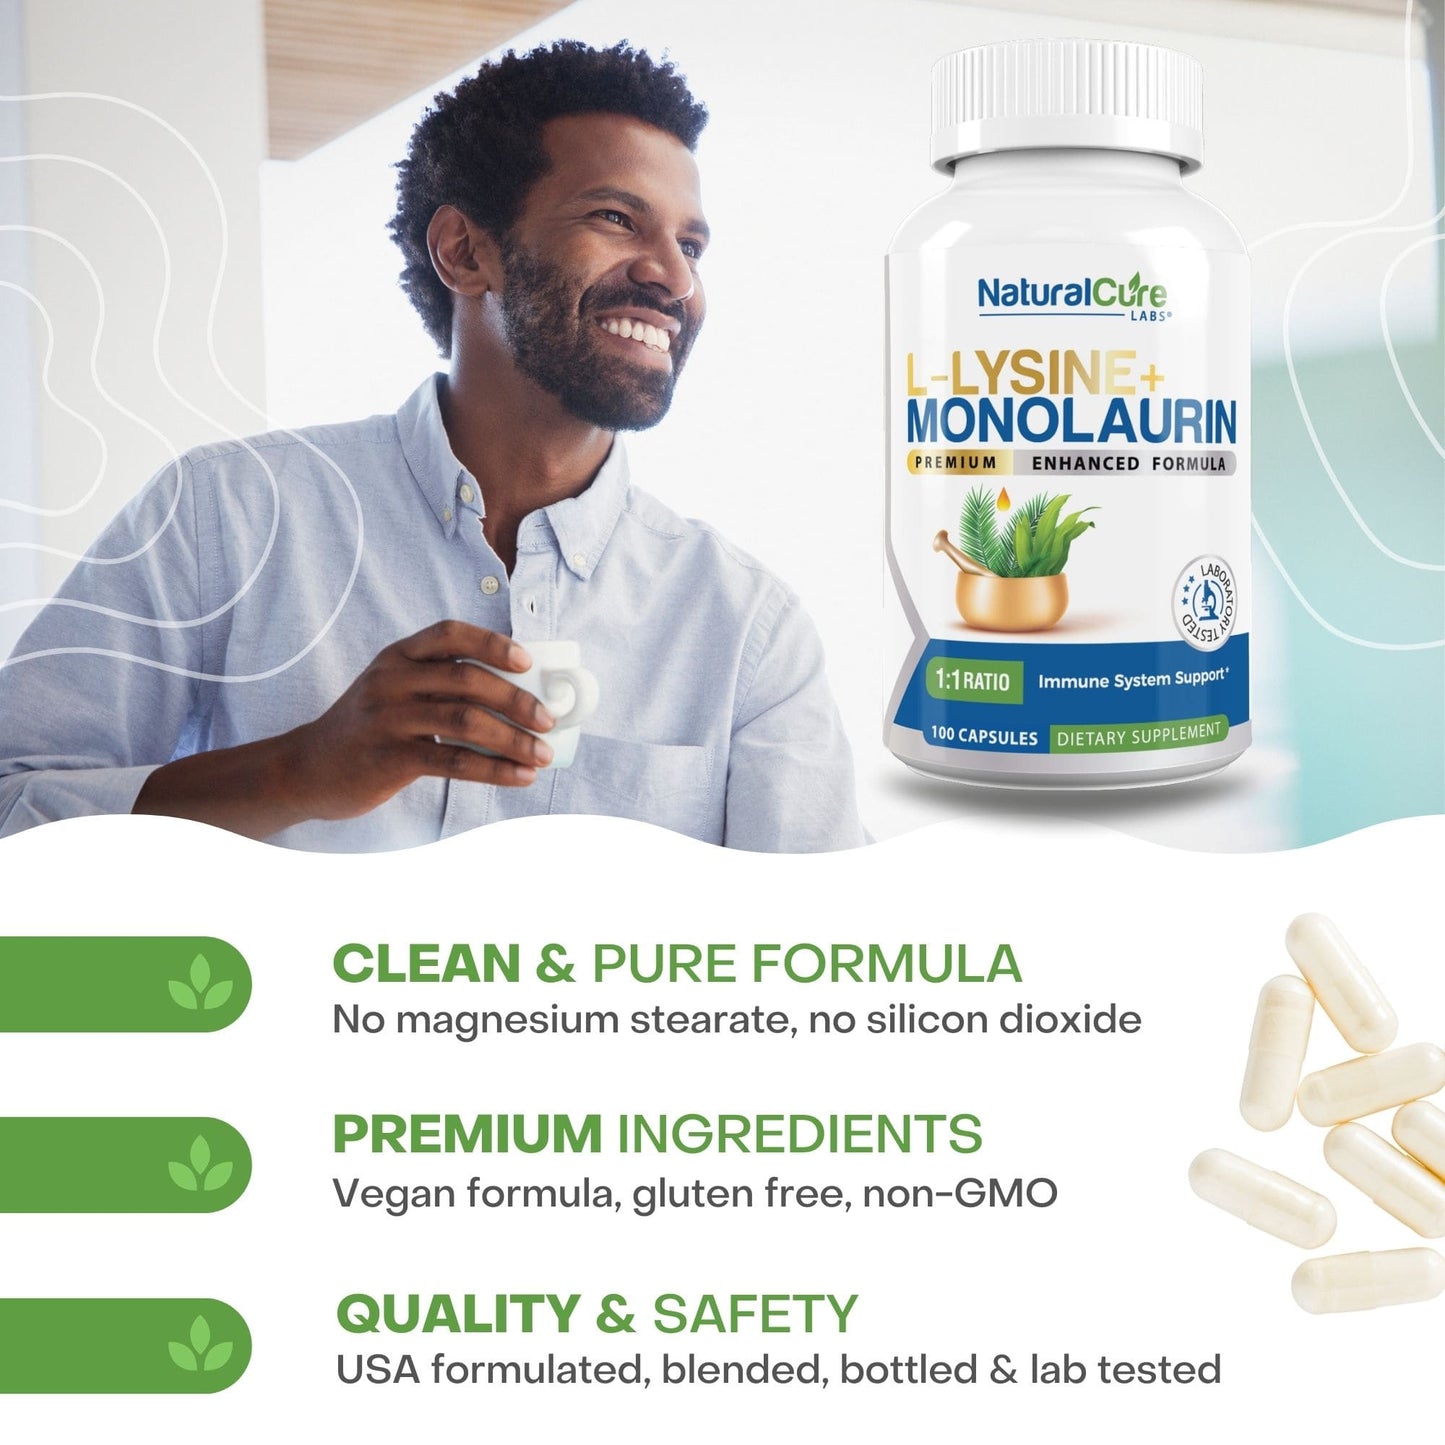 
                  
                    A content man enjoying a healthy lifestyle with a bottle of NaturalCure Labs L-Lysine + Monolaurin, emphasizing the monolaurin benefits for well-being along with a pure and clean supplement formula.
                  
                